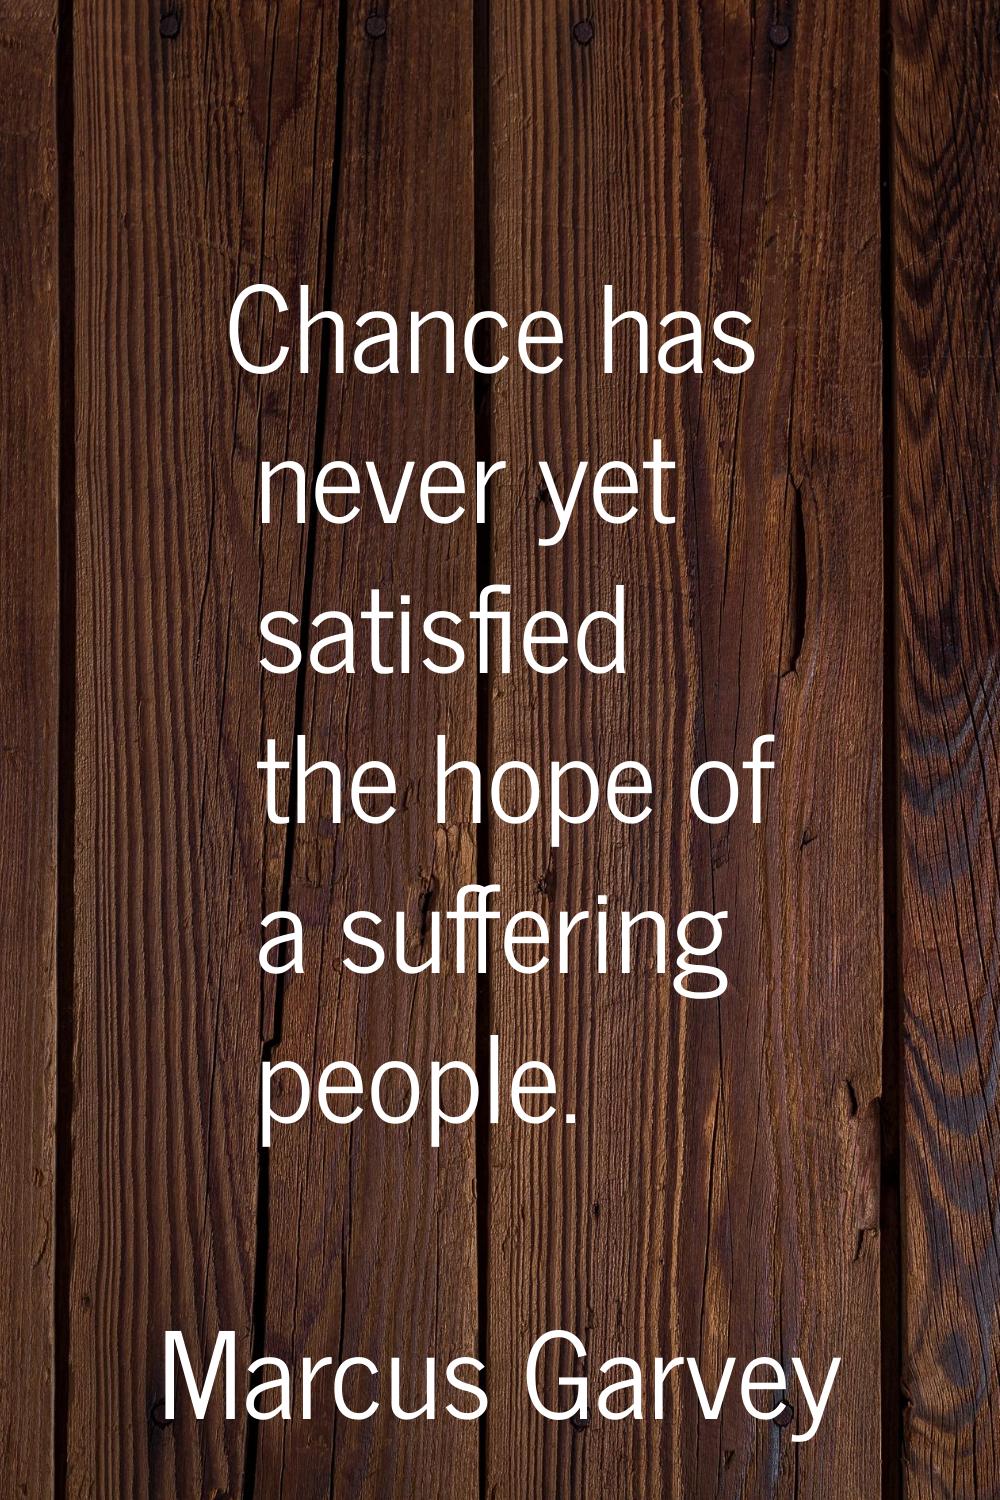 Chance has never yet satisfied the hope of a suffering people.